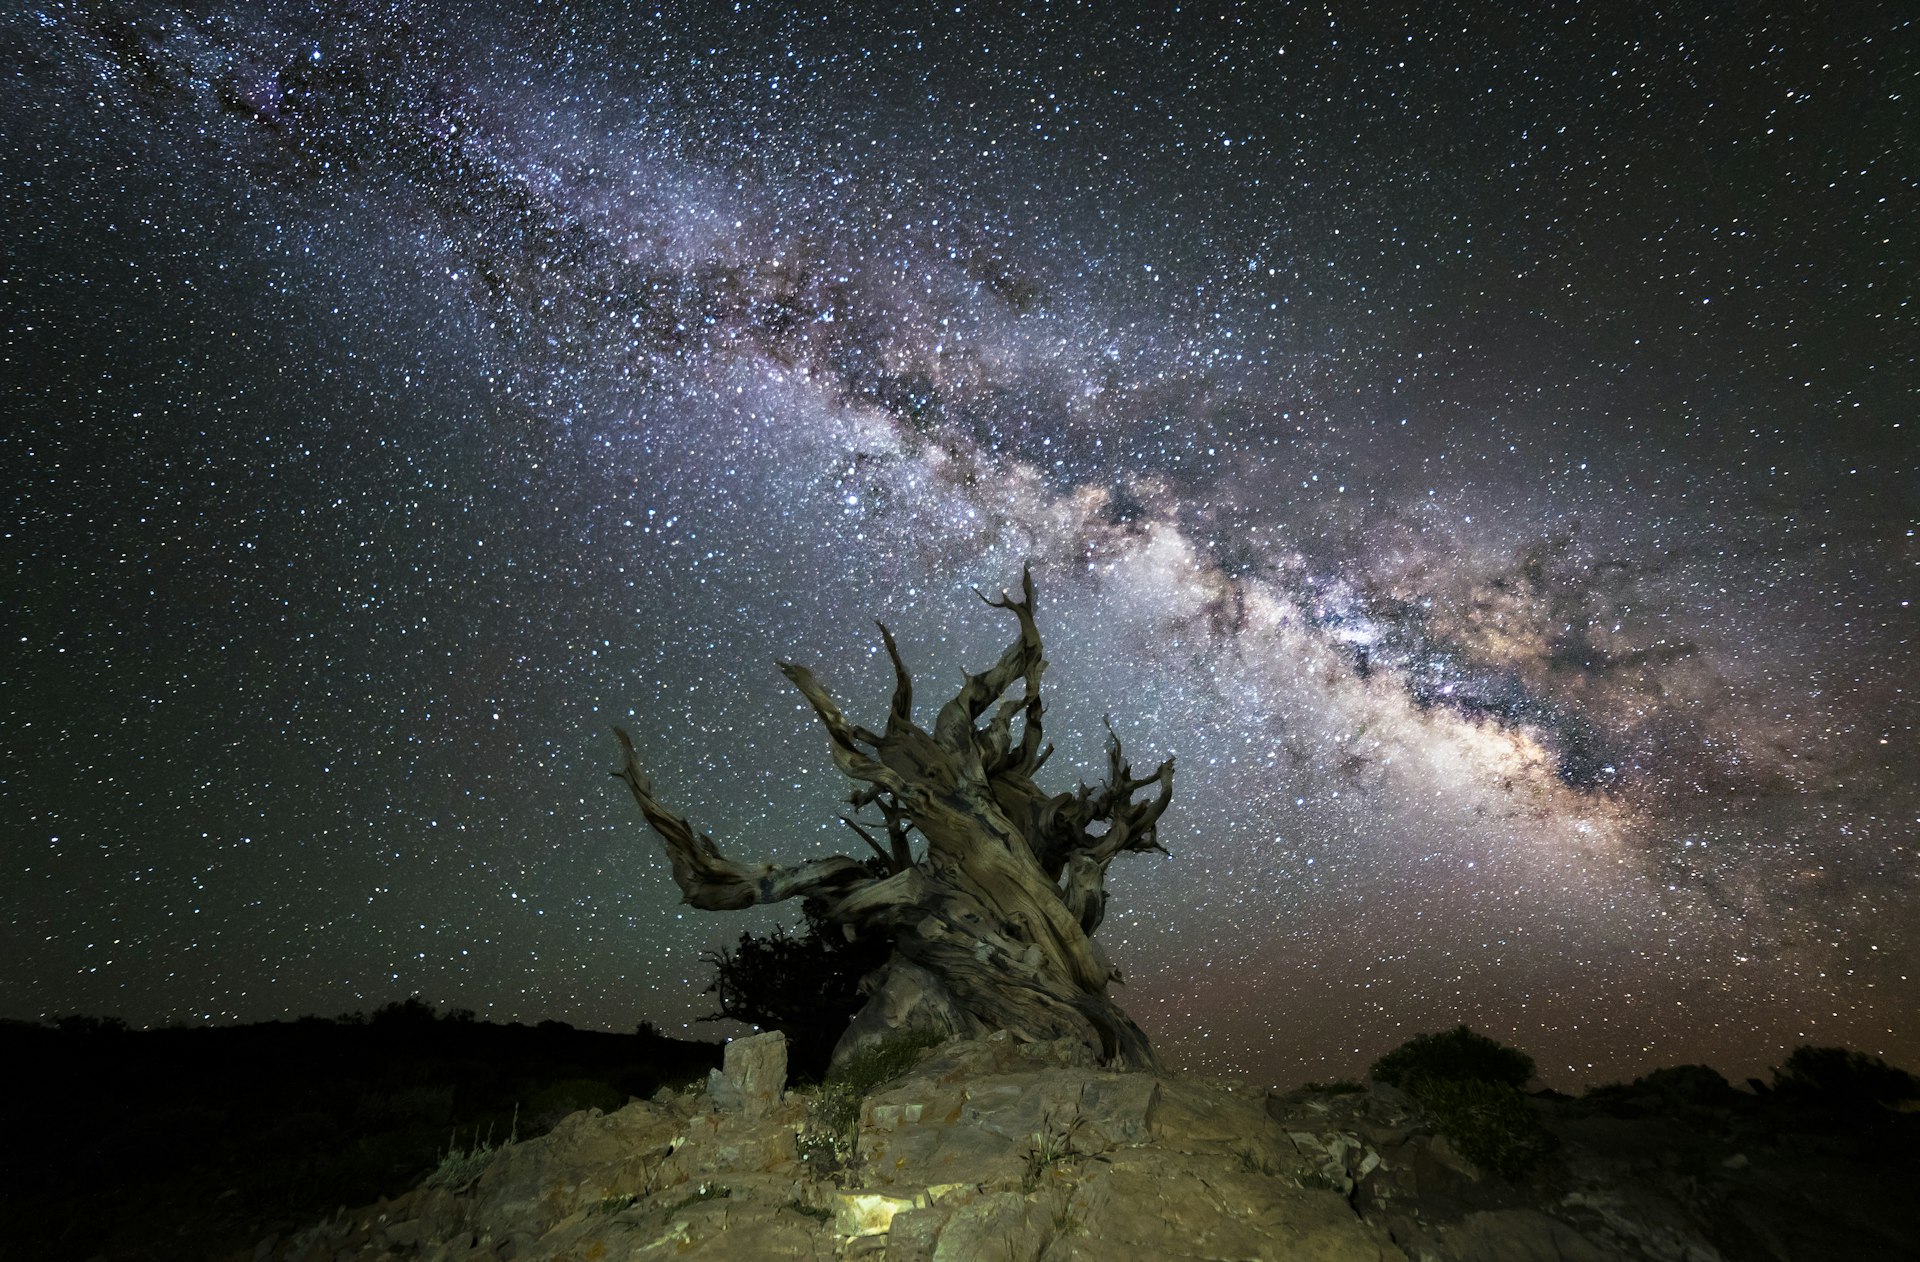 A bristlecone pine with the Milky Way overhead in Schulman Grove in Inyo National Forest 